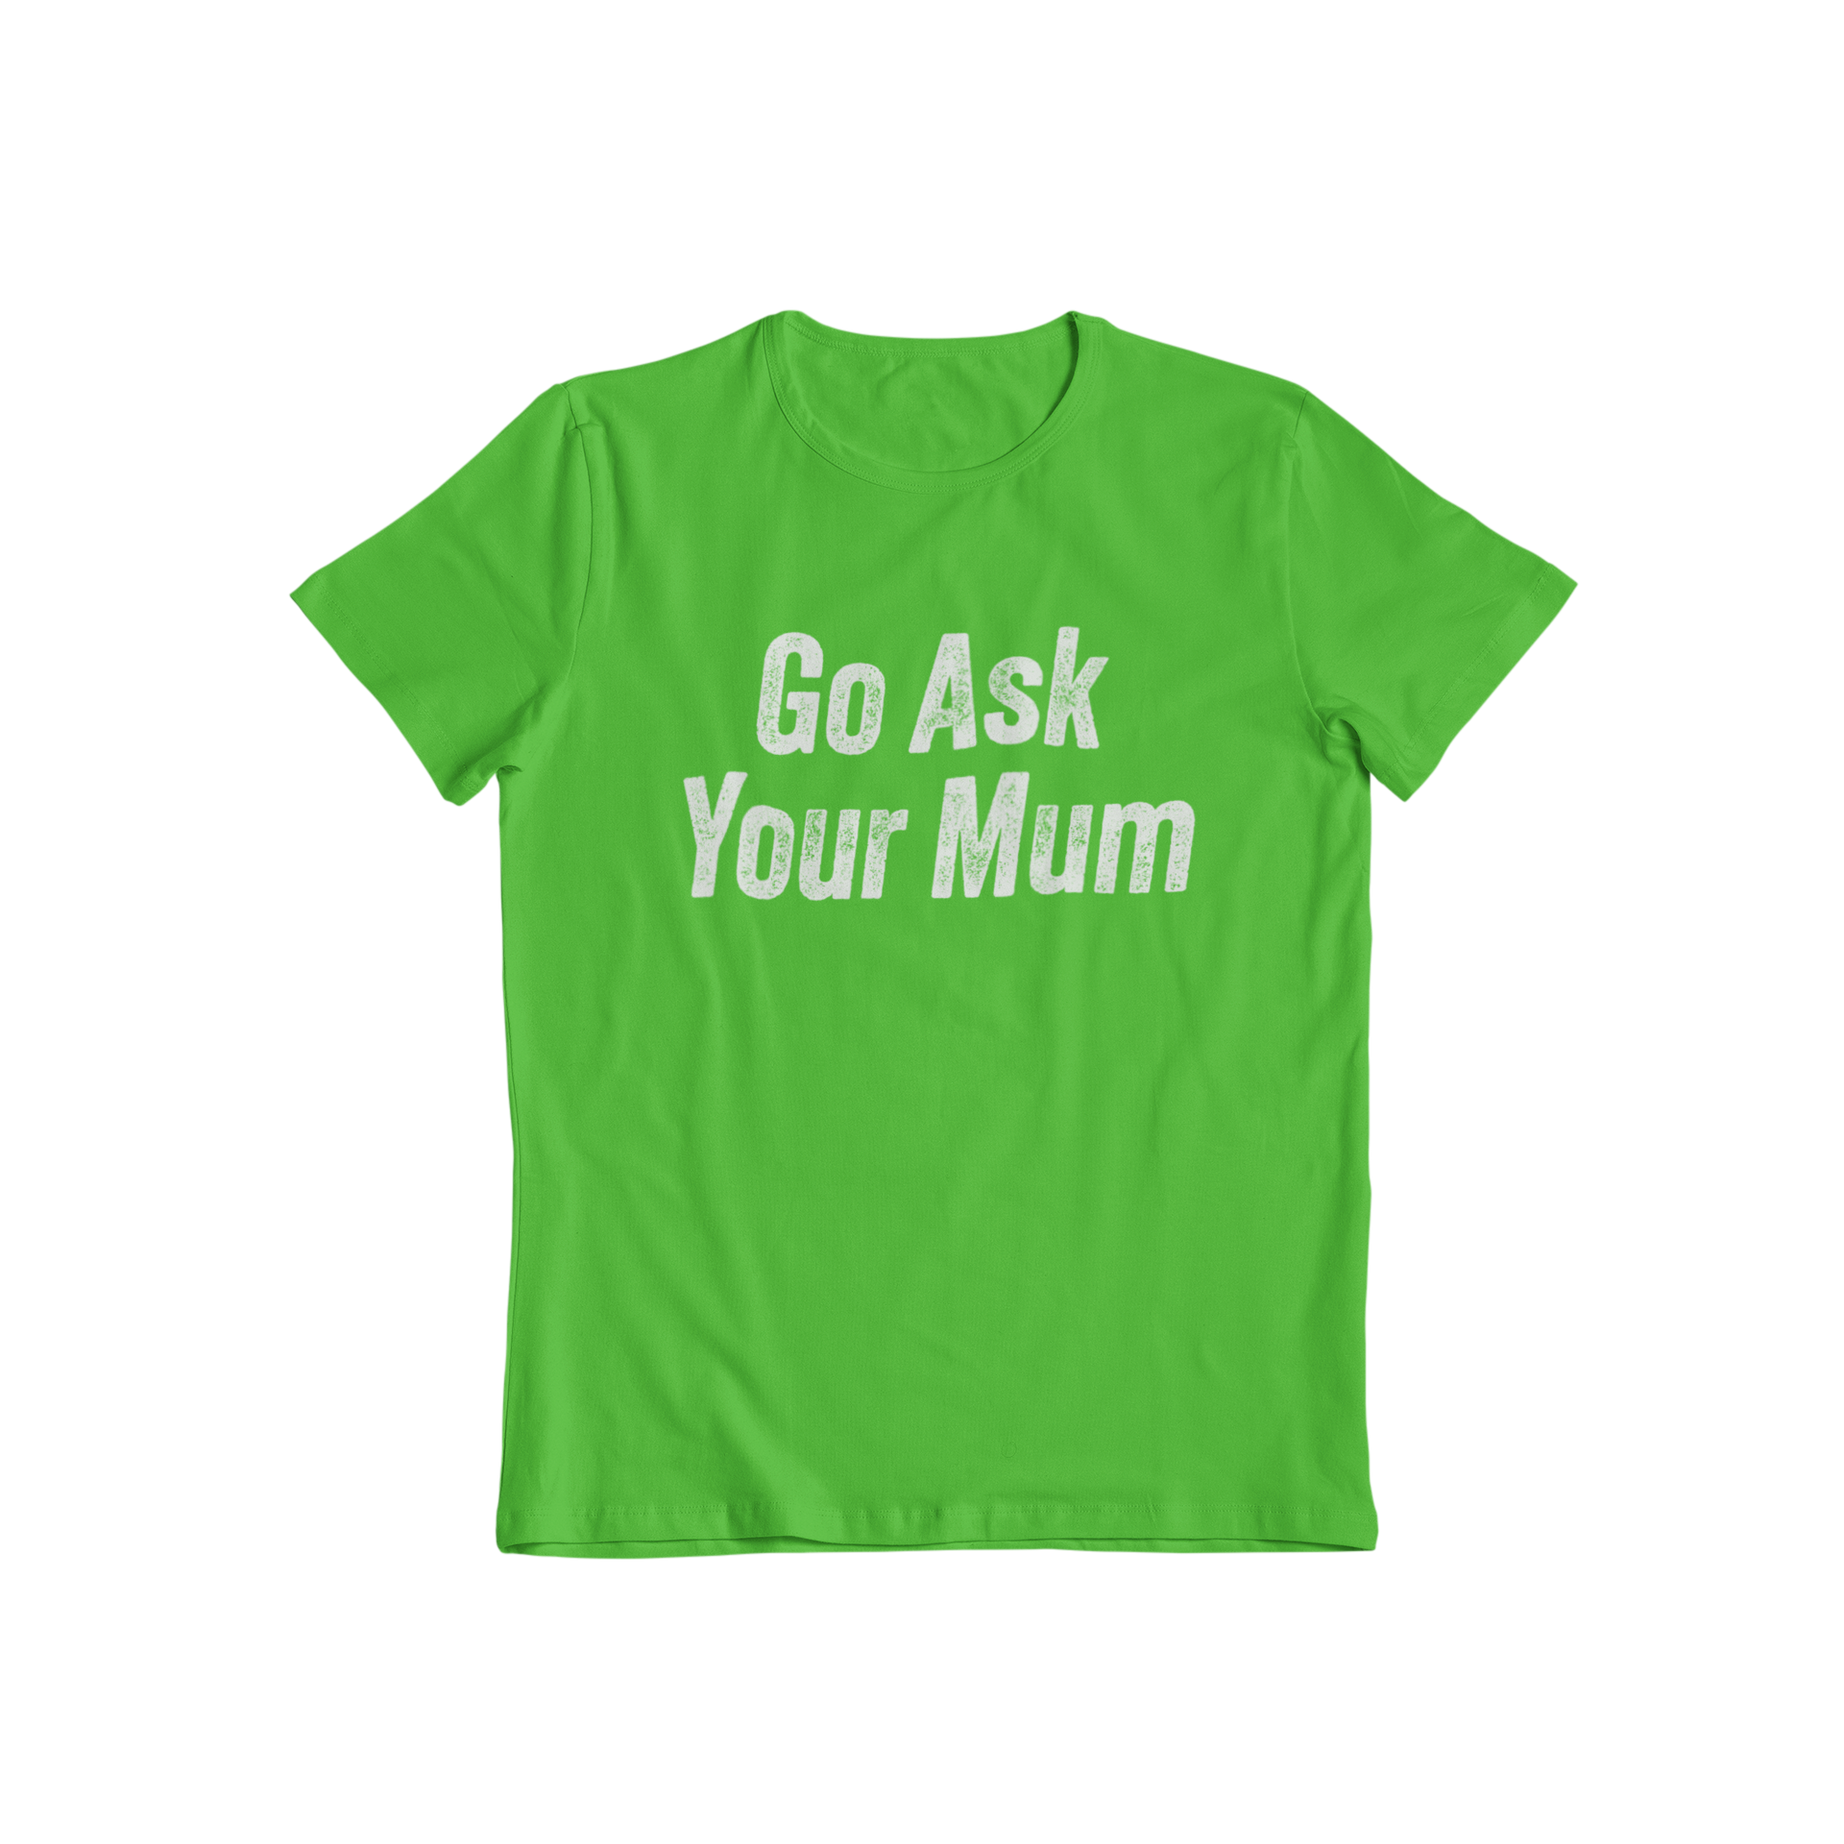 This Ask Mum T-shirt is the perfect addition to any family wardrobe. Featuring a matching "go ask your mum" slogan, it pairs perfectly with our Ask Dad t-shirt. Show off your family's sense of humor with this fun and stylish t-shirt.